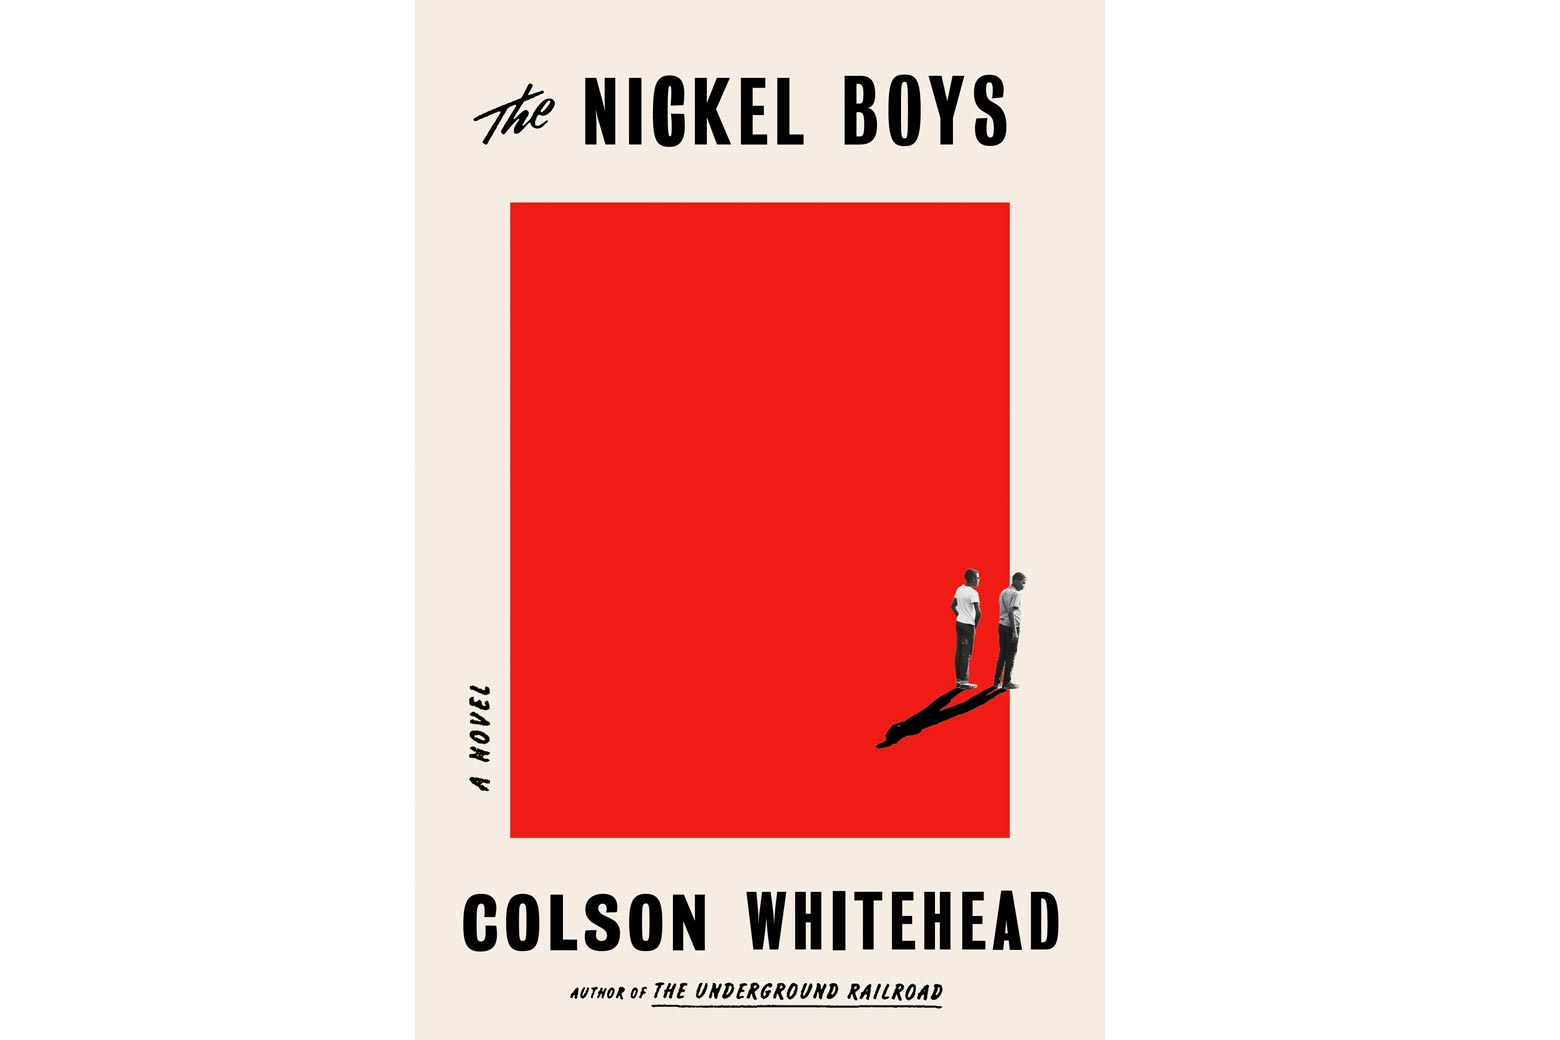 The Nickel Boys book cover.